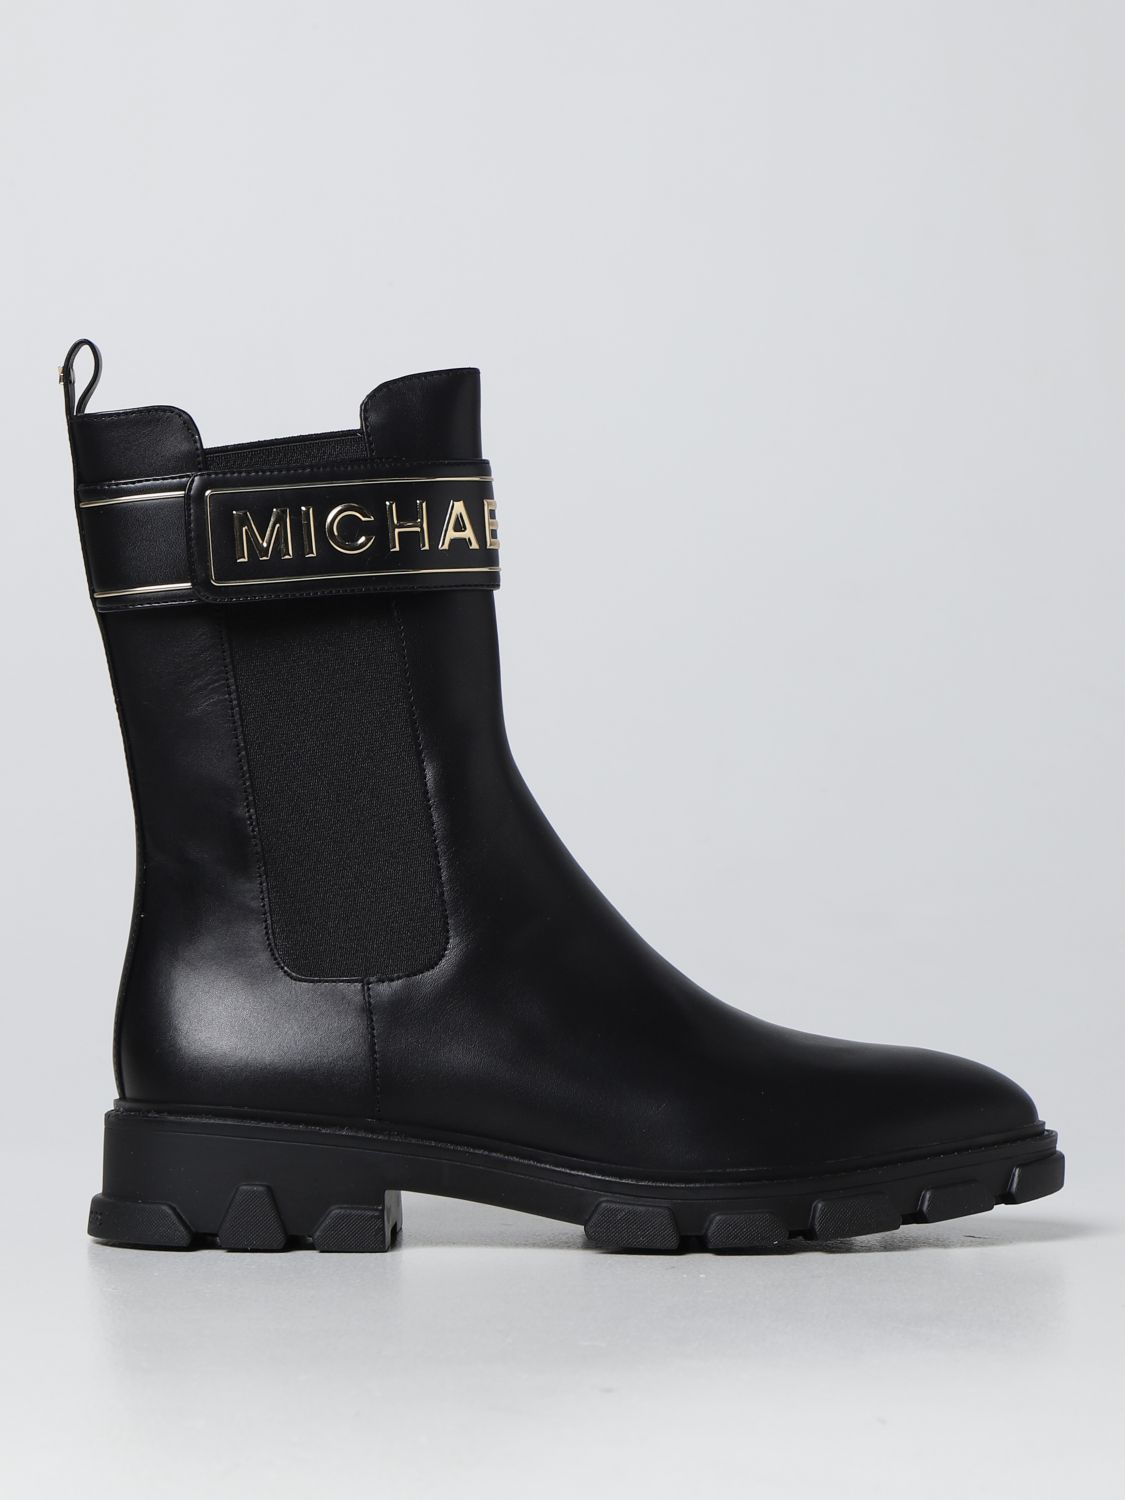 Michael Kors slouchy boot  Slouchy boots Boots Riding boots